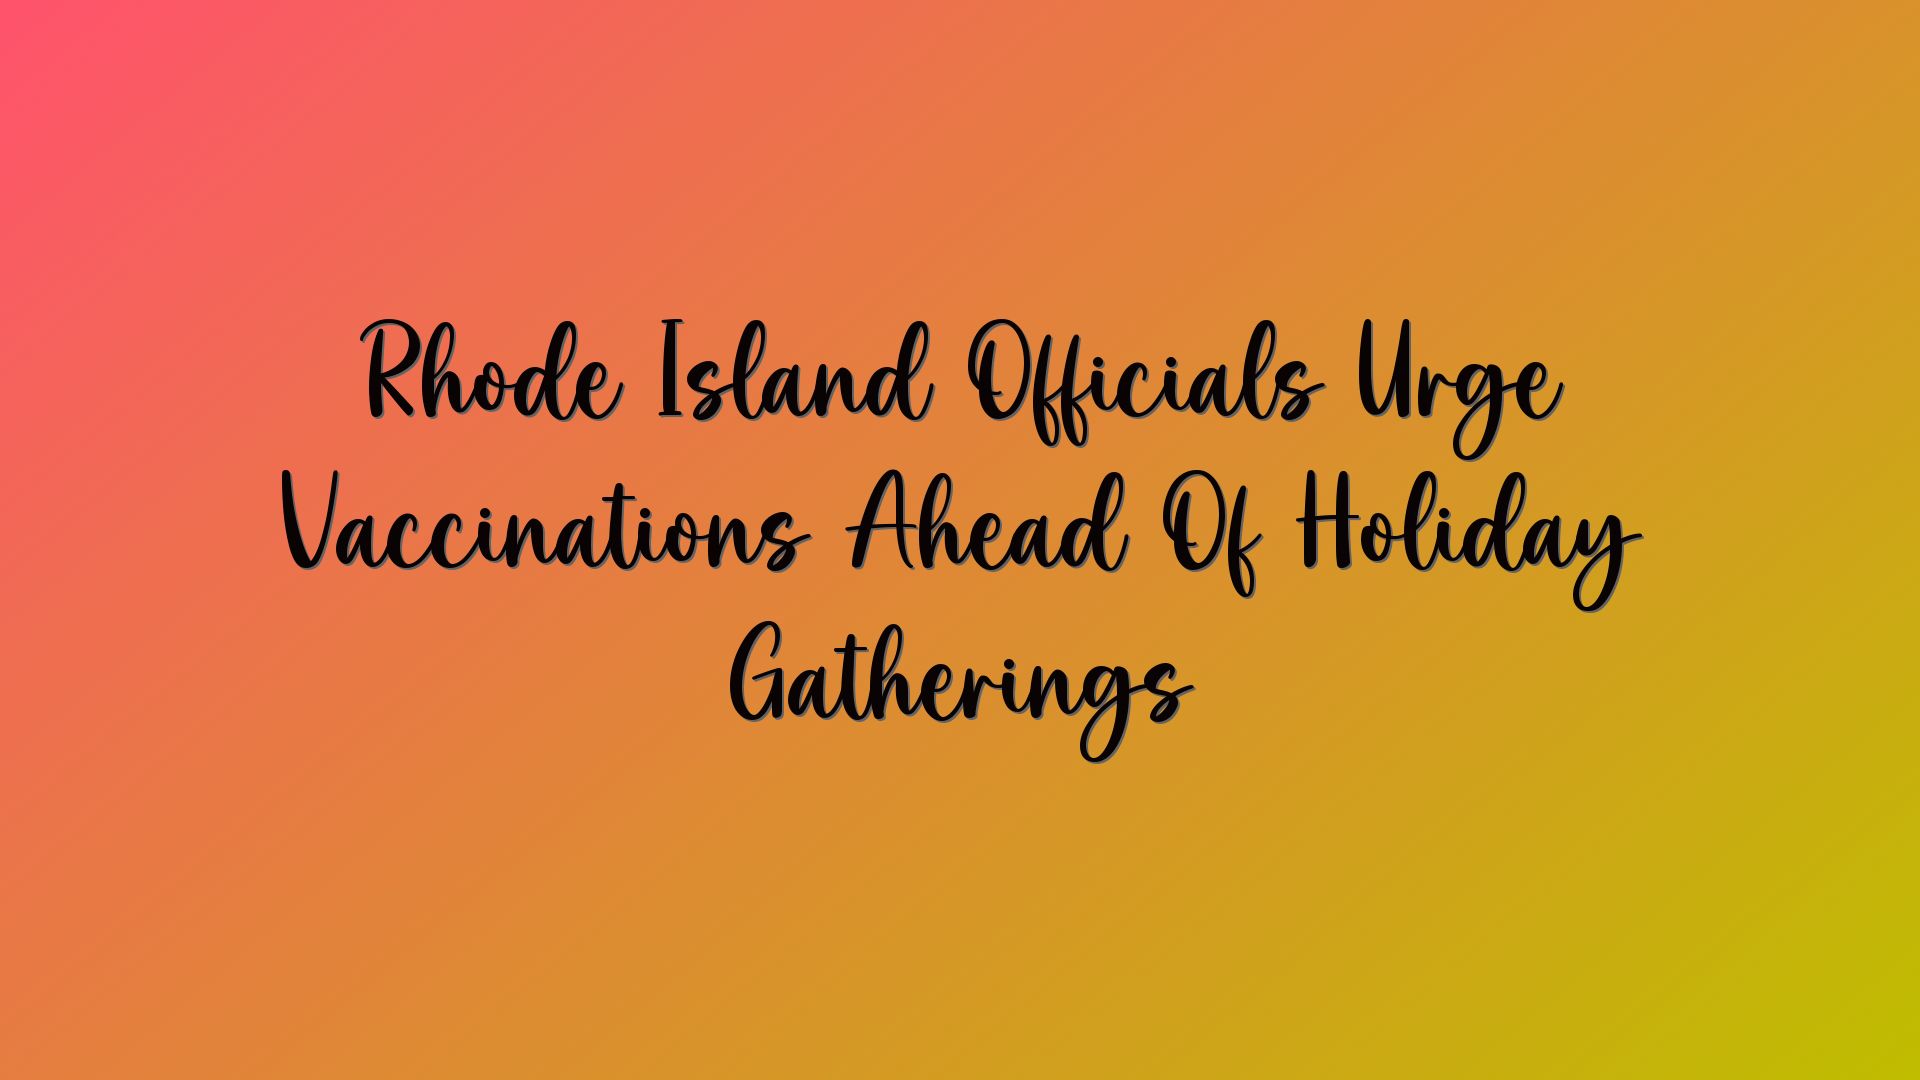 Rhode Island Officials Urge Vaccinations Ahead Of Holiday Gatherings